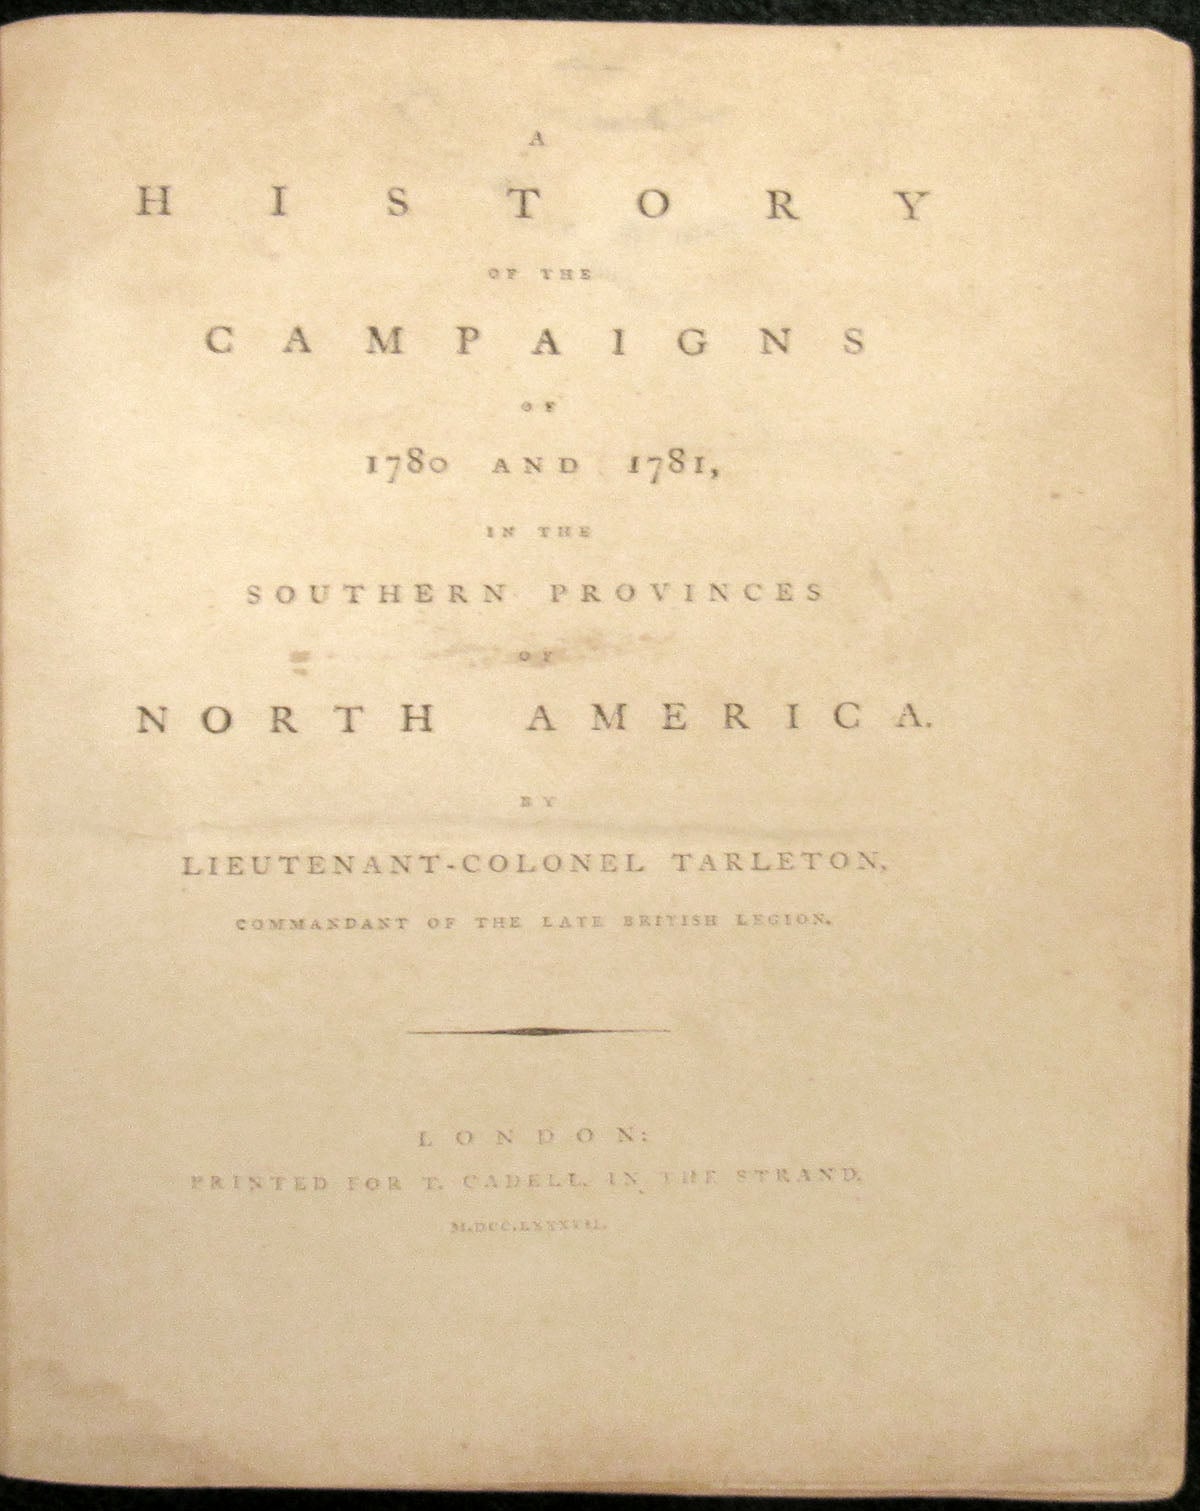 Item #30434 A HISTORY OF THE CAMPAIGNS OF 1780 AND 1781, IN THE SOUTHERN PROVINCES OF NORTH AMERICA [Included With a Portfolio Volume of the Map and Plans]. Lieutenant-Colonel Tarleton, Banastre.